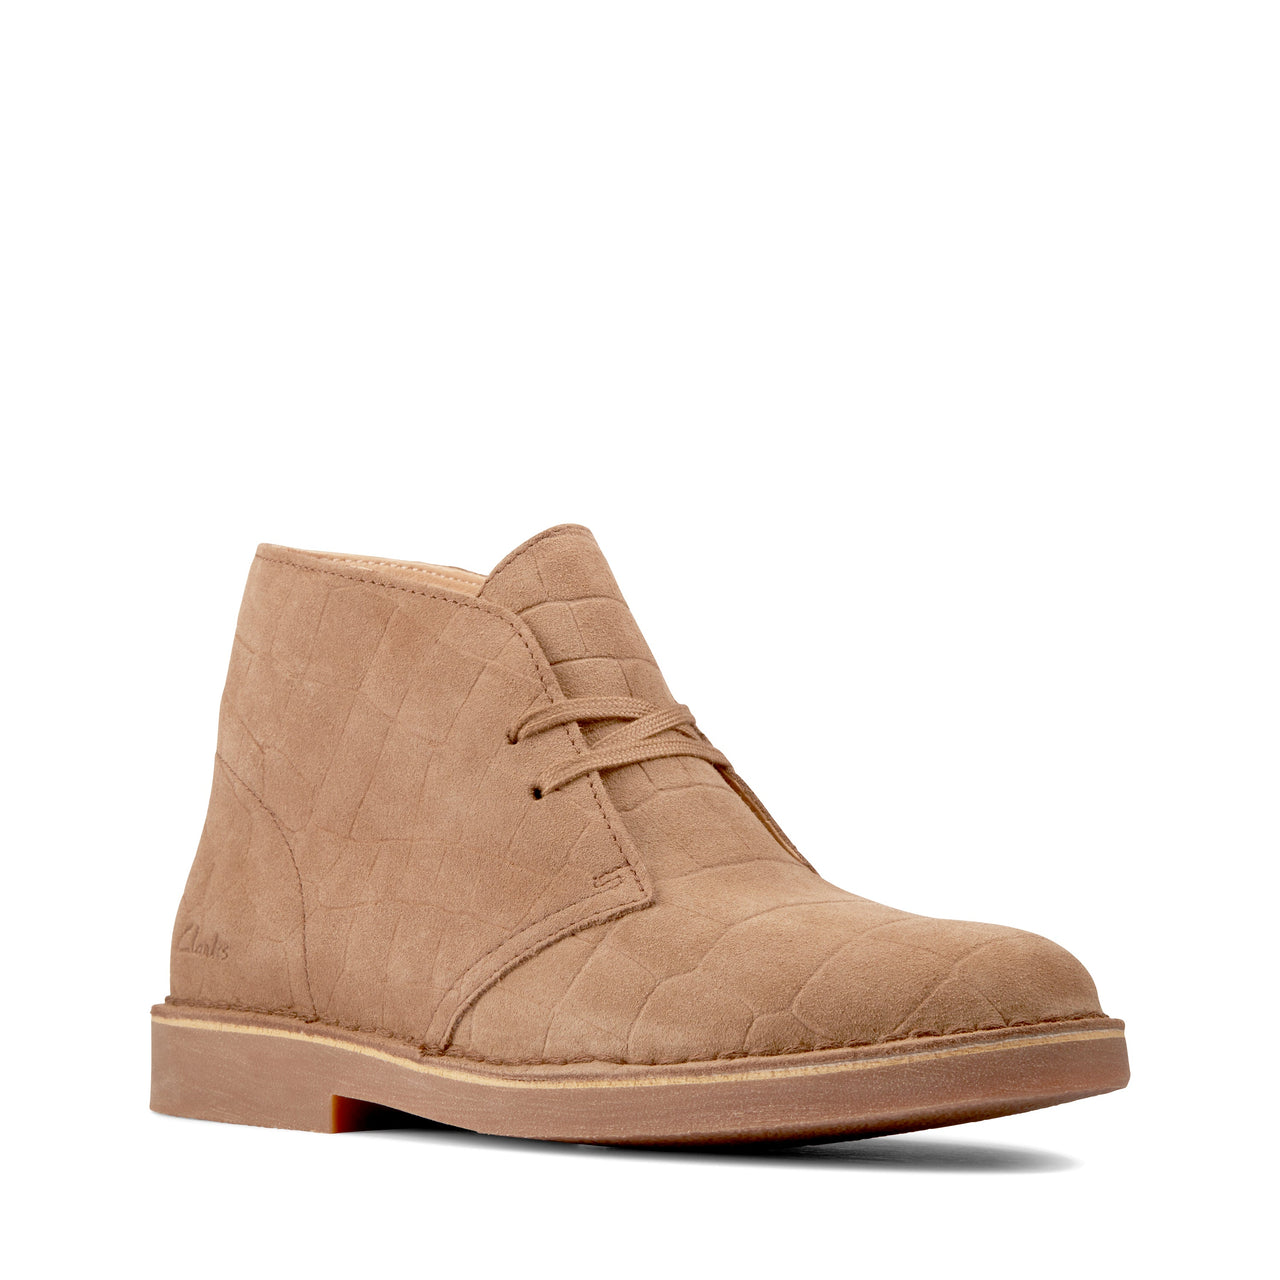  Clarks Womens Desert Boot 2 with classic round toe and lace-up closure